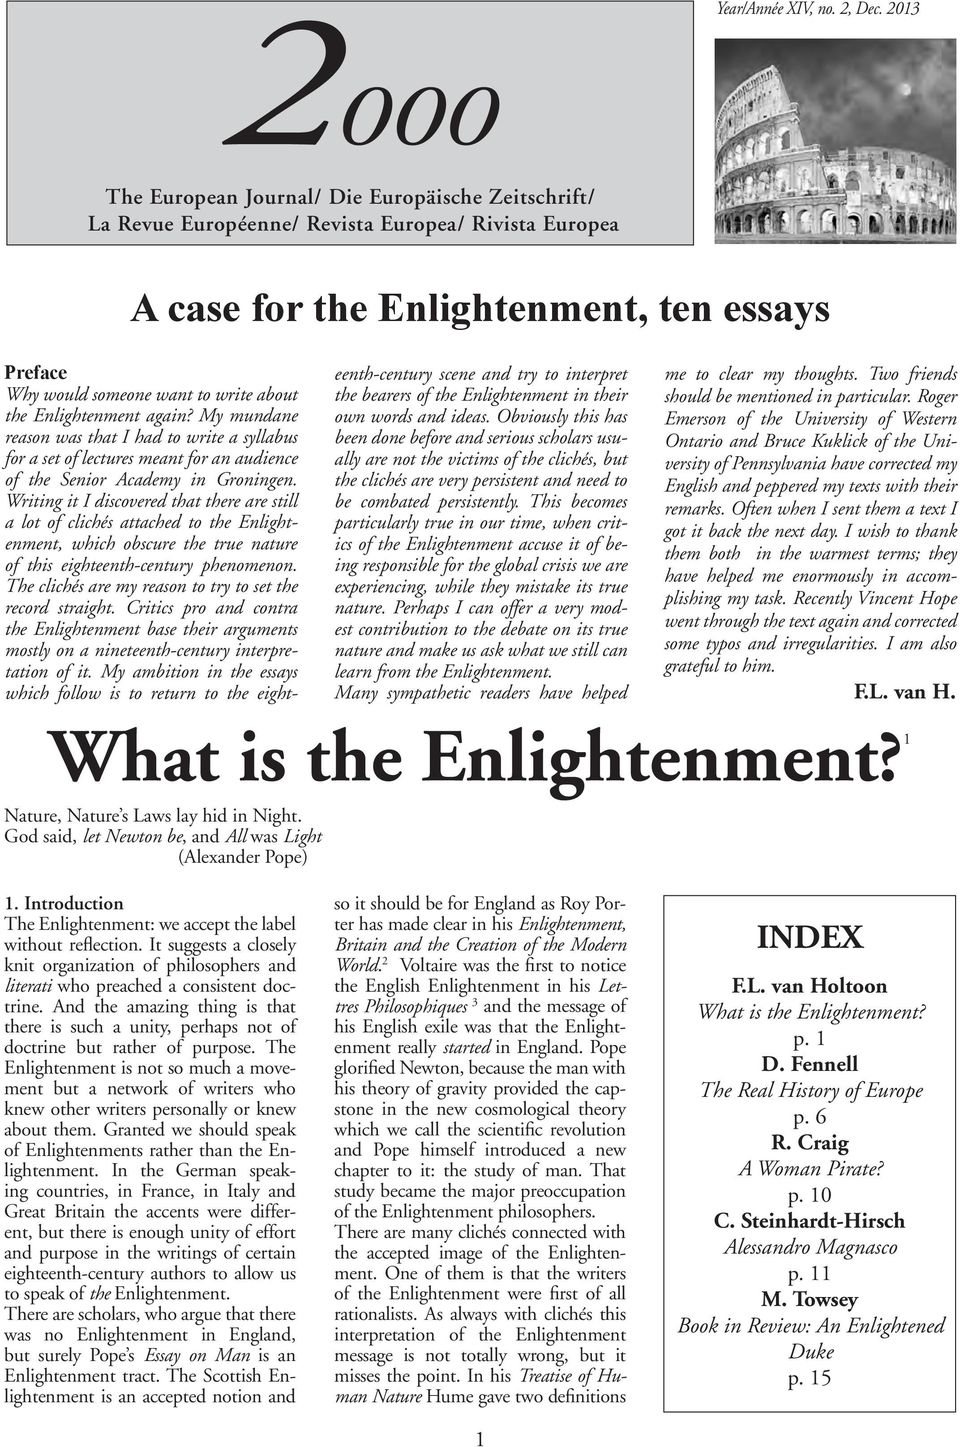 about the Enlightenment again? My mundane reason was that I had to write a syllabus for a set of lectures meant for an audience of the Senior Academy in Groningen.